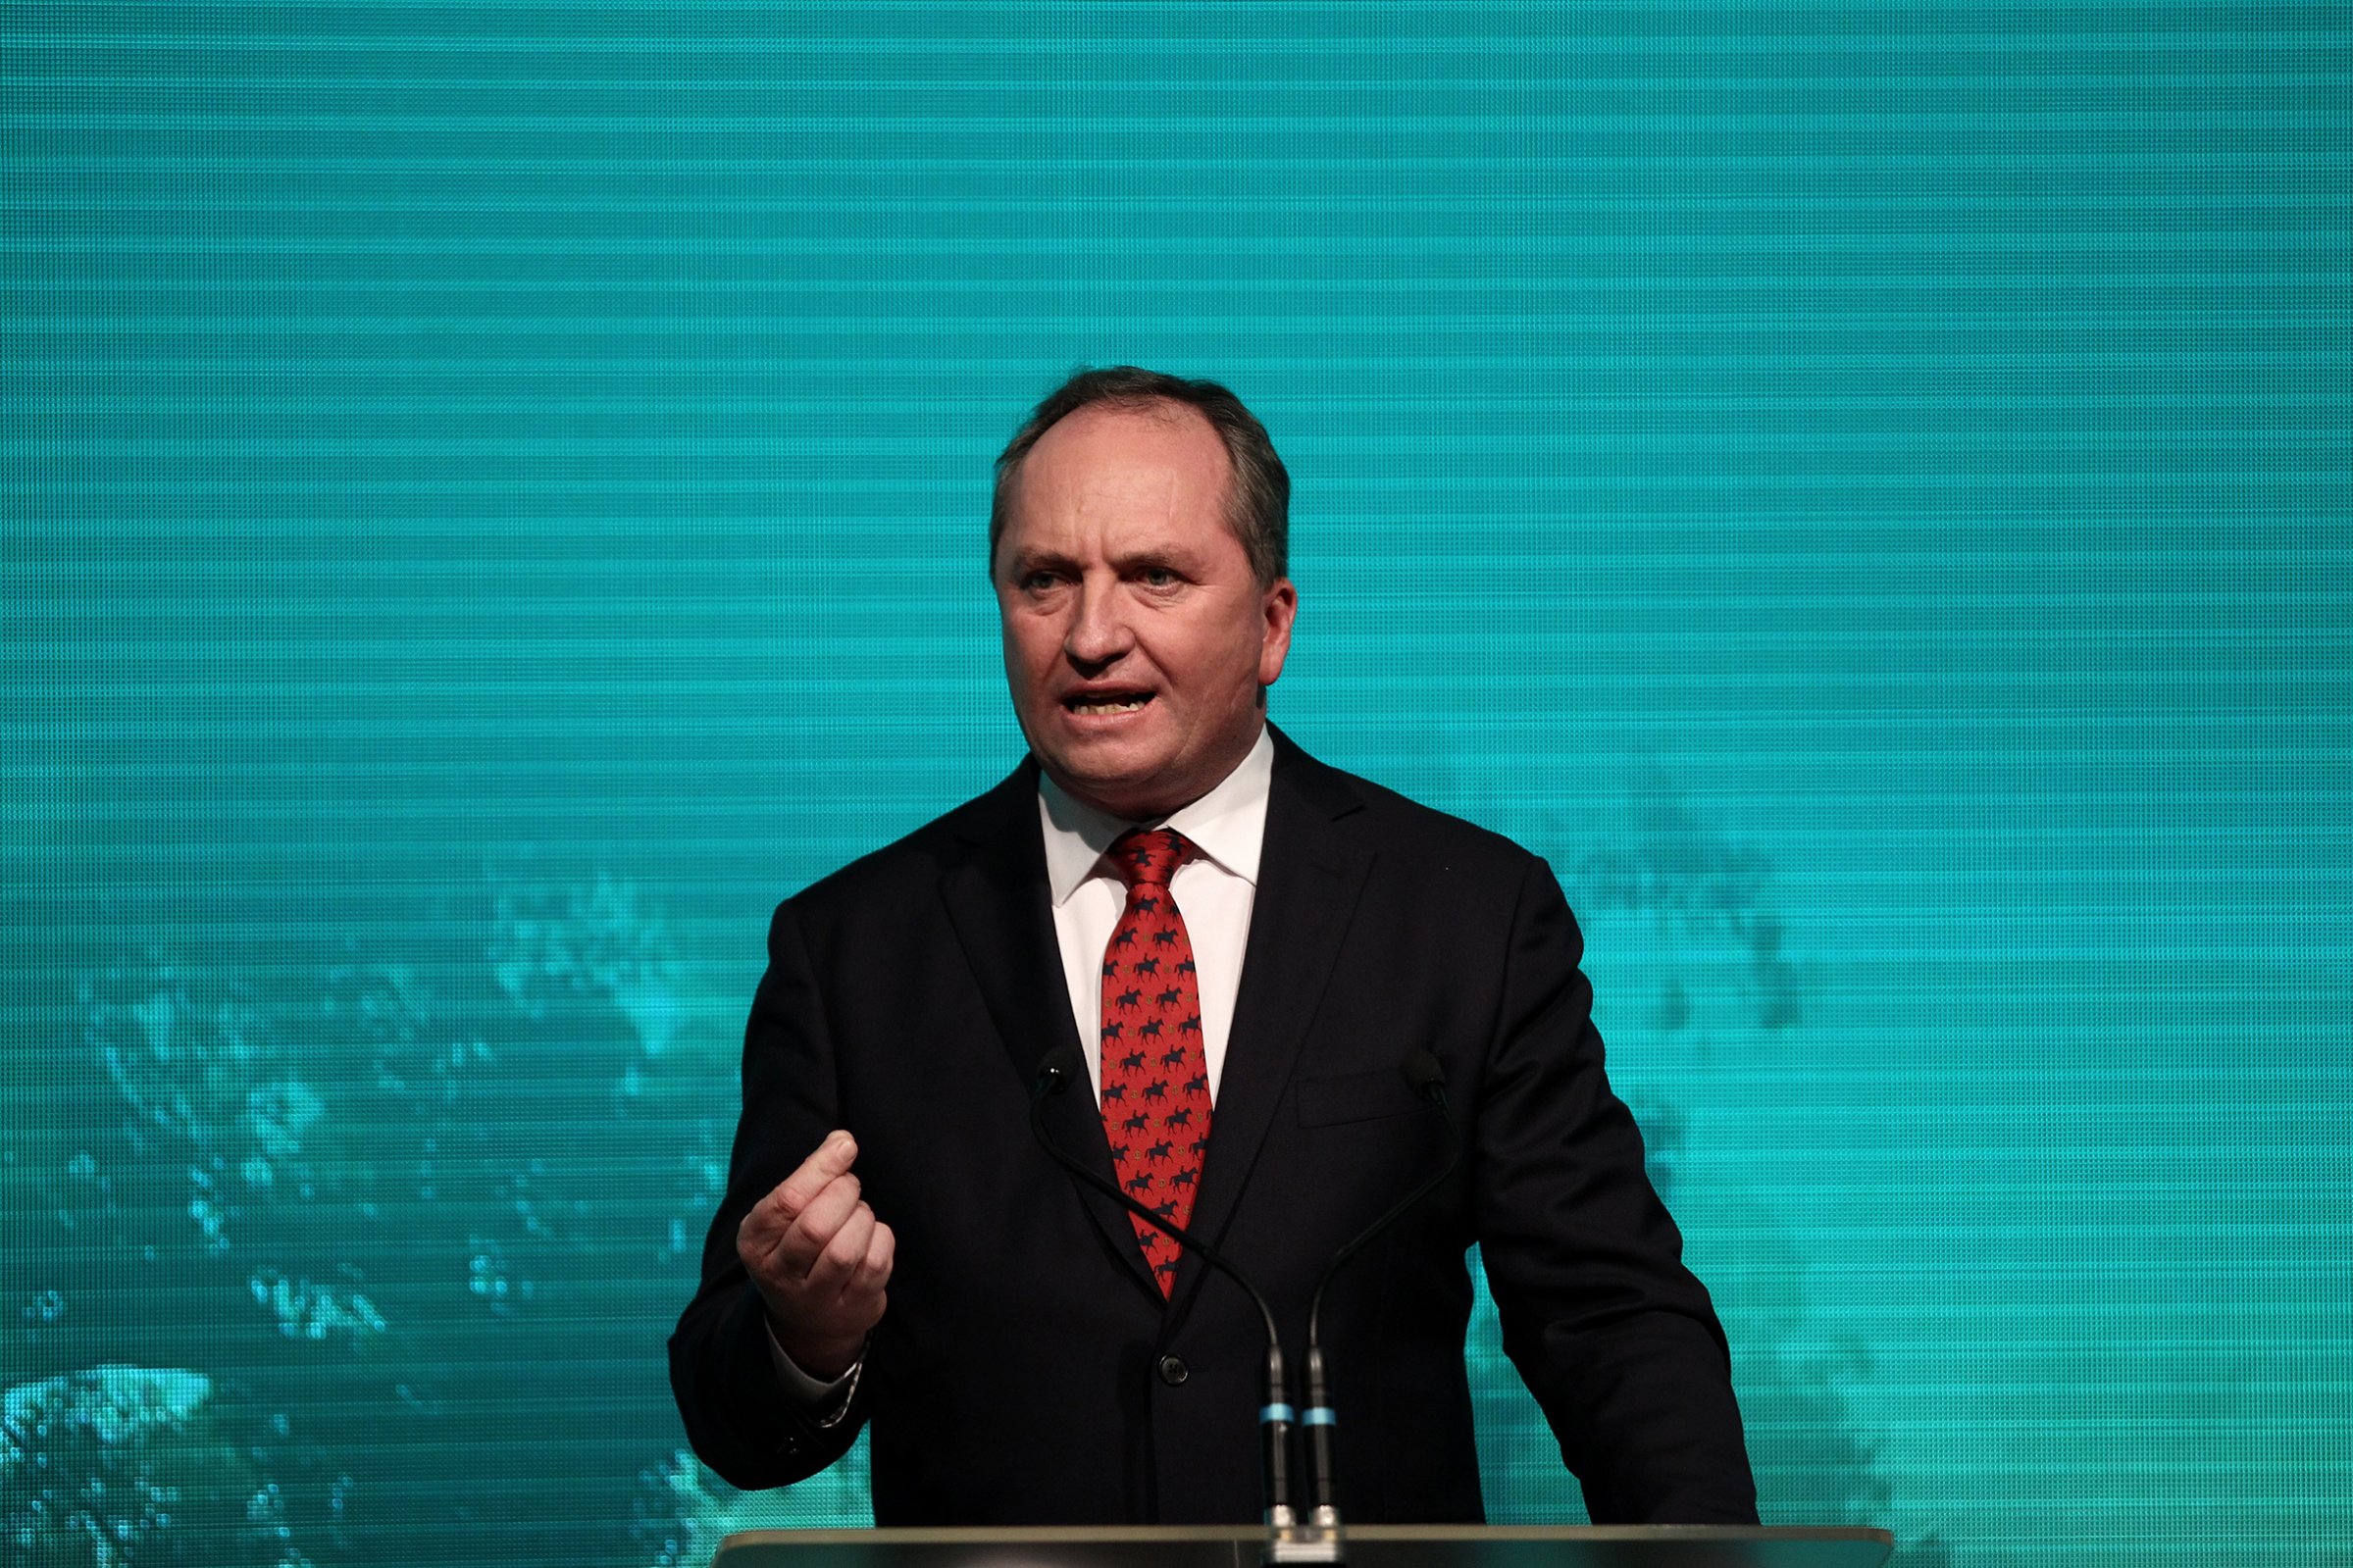 Joyce, Australia’s Deputy Prime Minister, says he was “shocked” to learn he is also a citizen of New Zealand